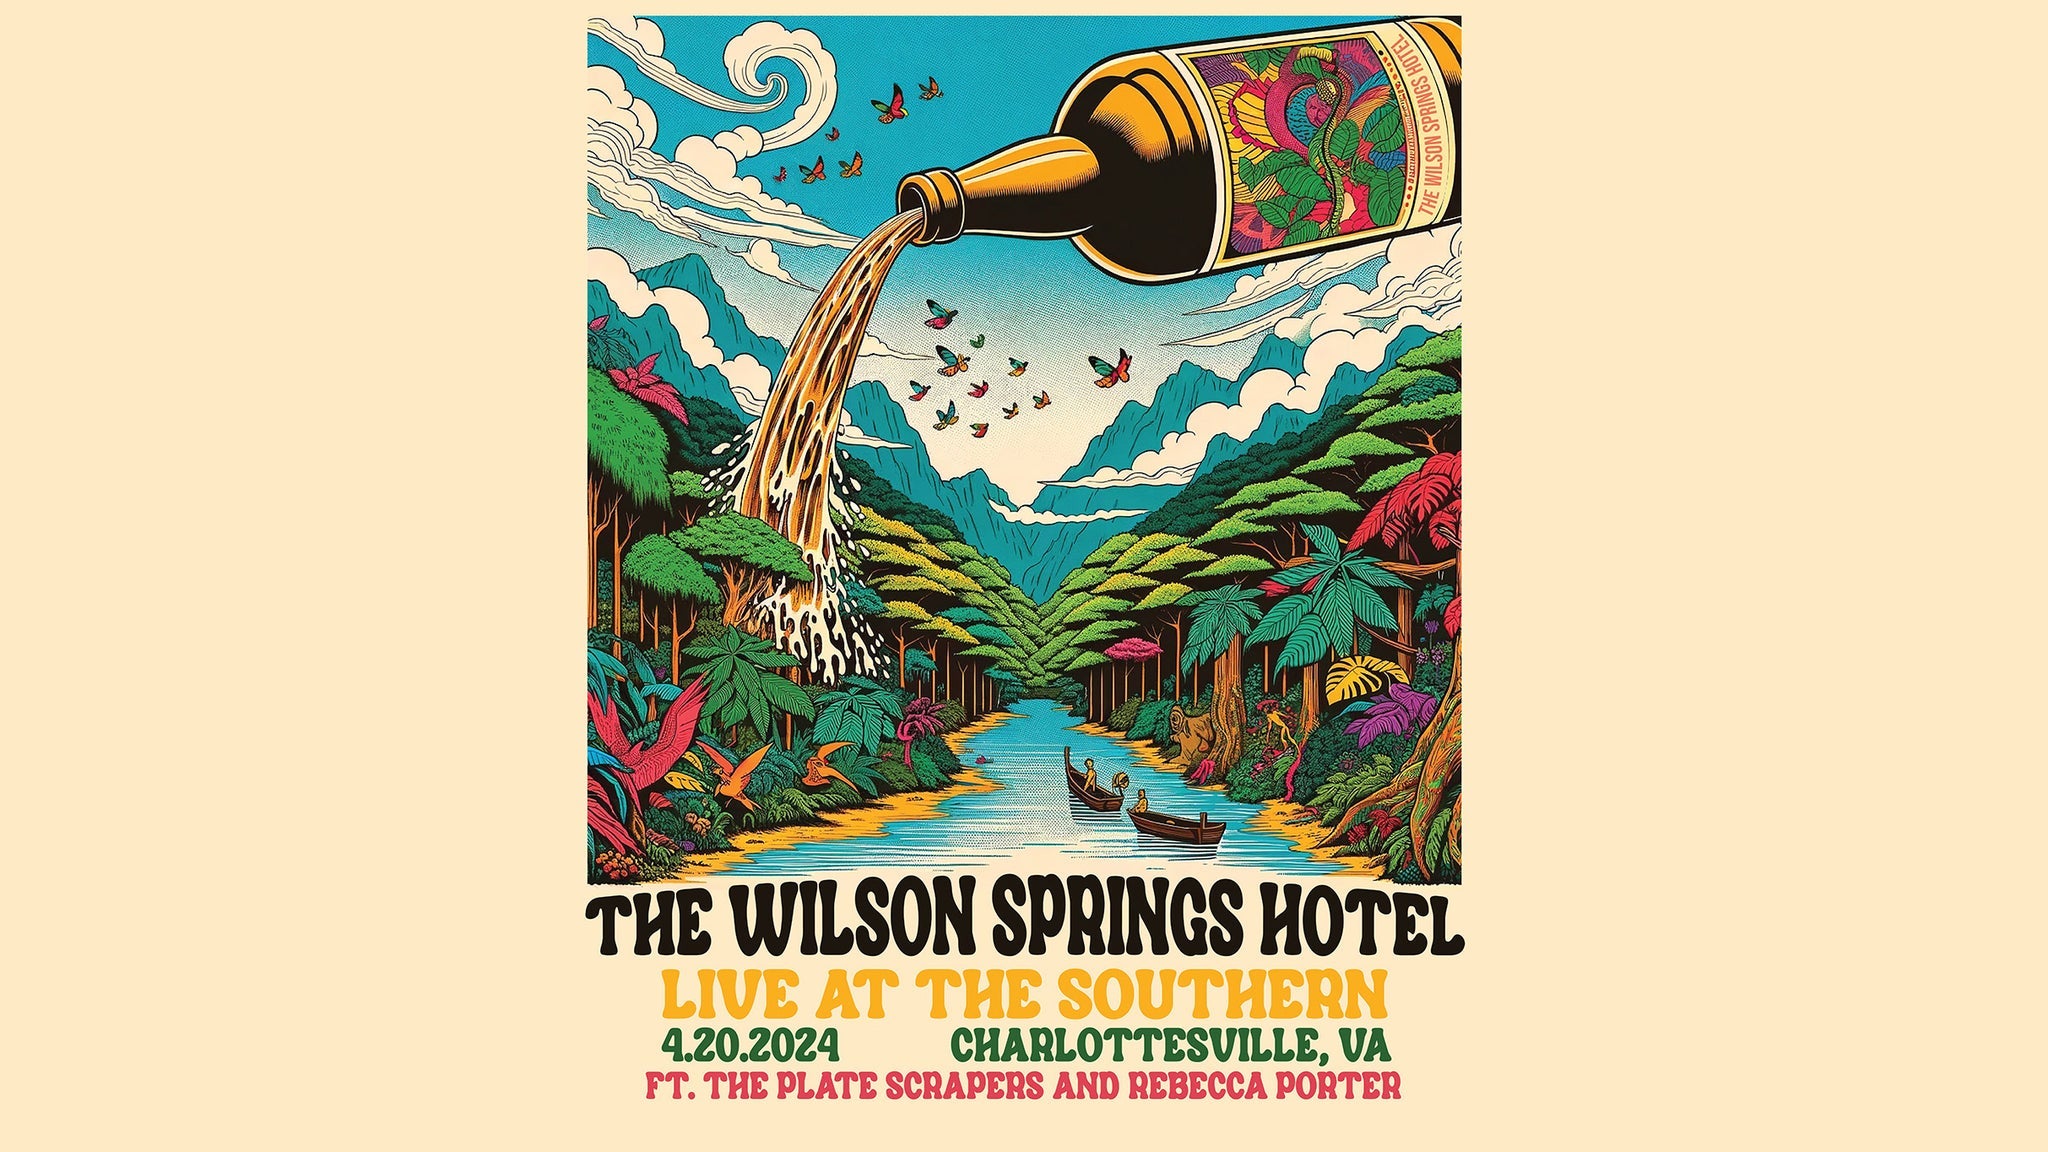 The Wilson Springs Hotel at The Southern Cafe & Music Hall